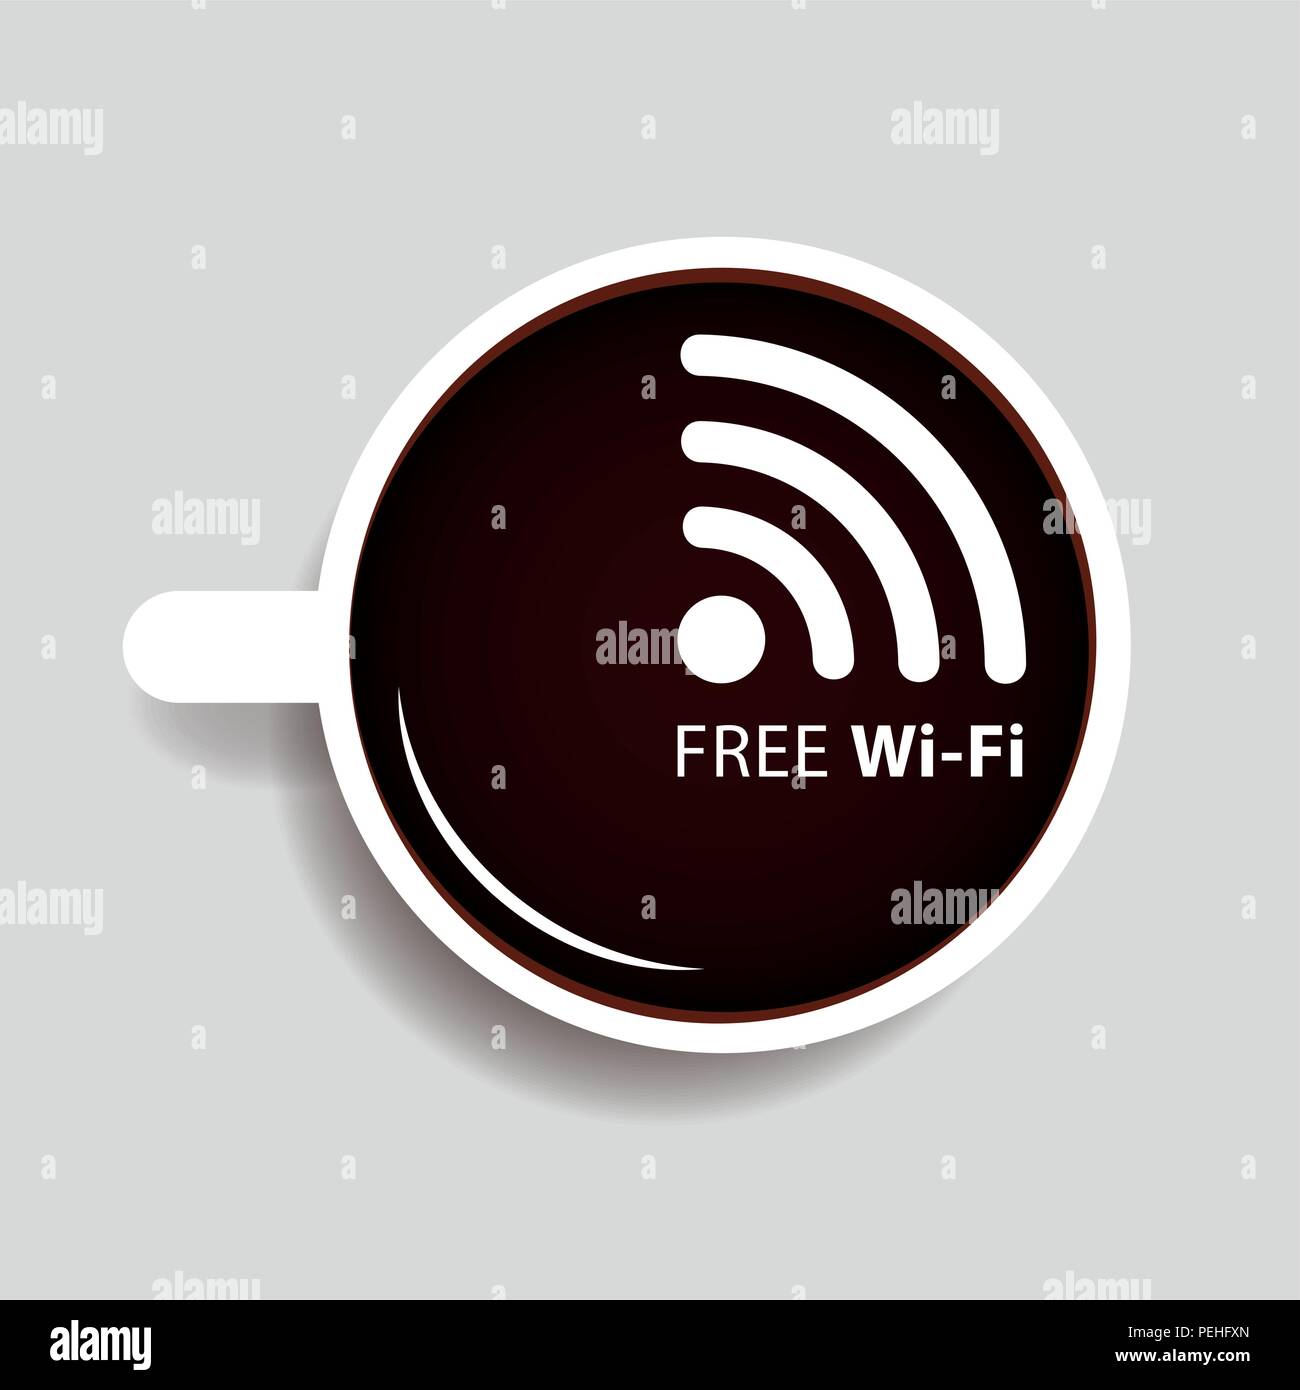 free Wi-Fi symbol in a coffee cup vector illustration EPS10 Stock Vector